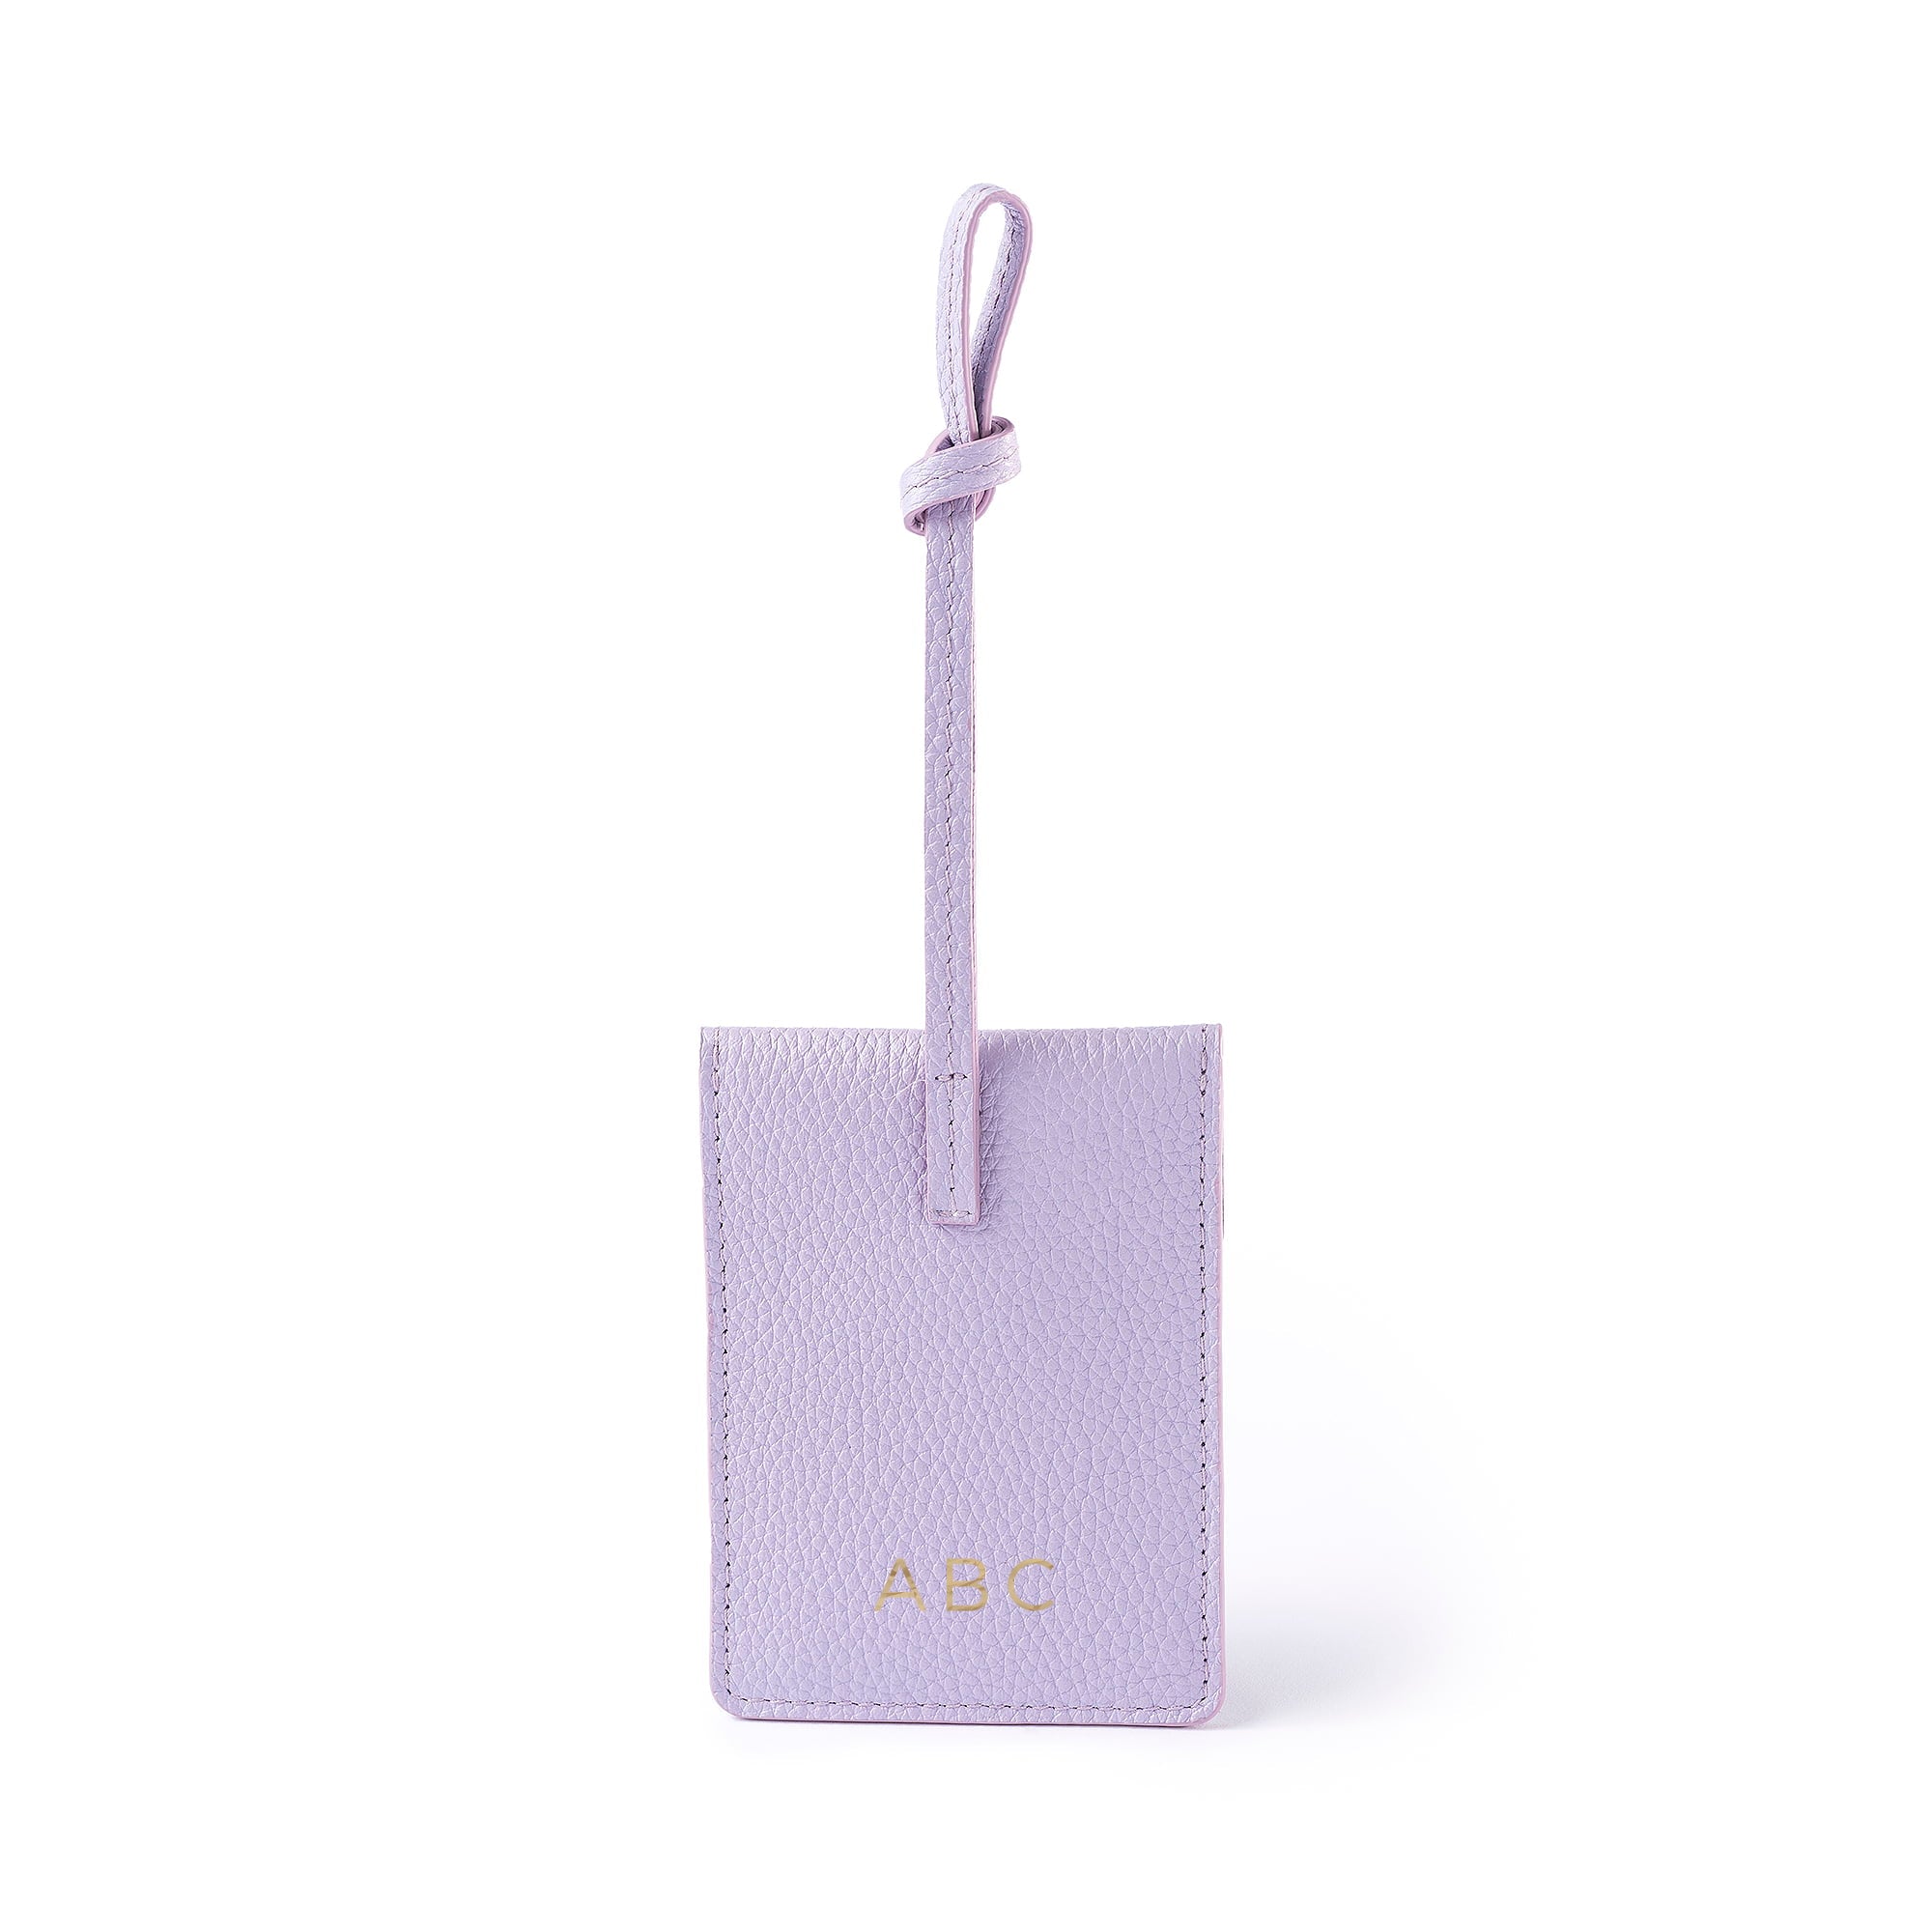 STOW Leather Multi Tag in Wild Lavender pebbled leather with personalised initials on the back.